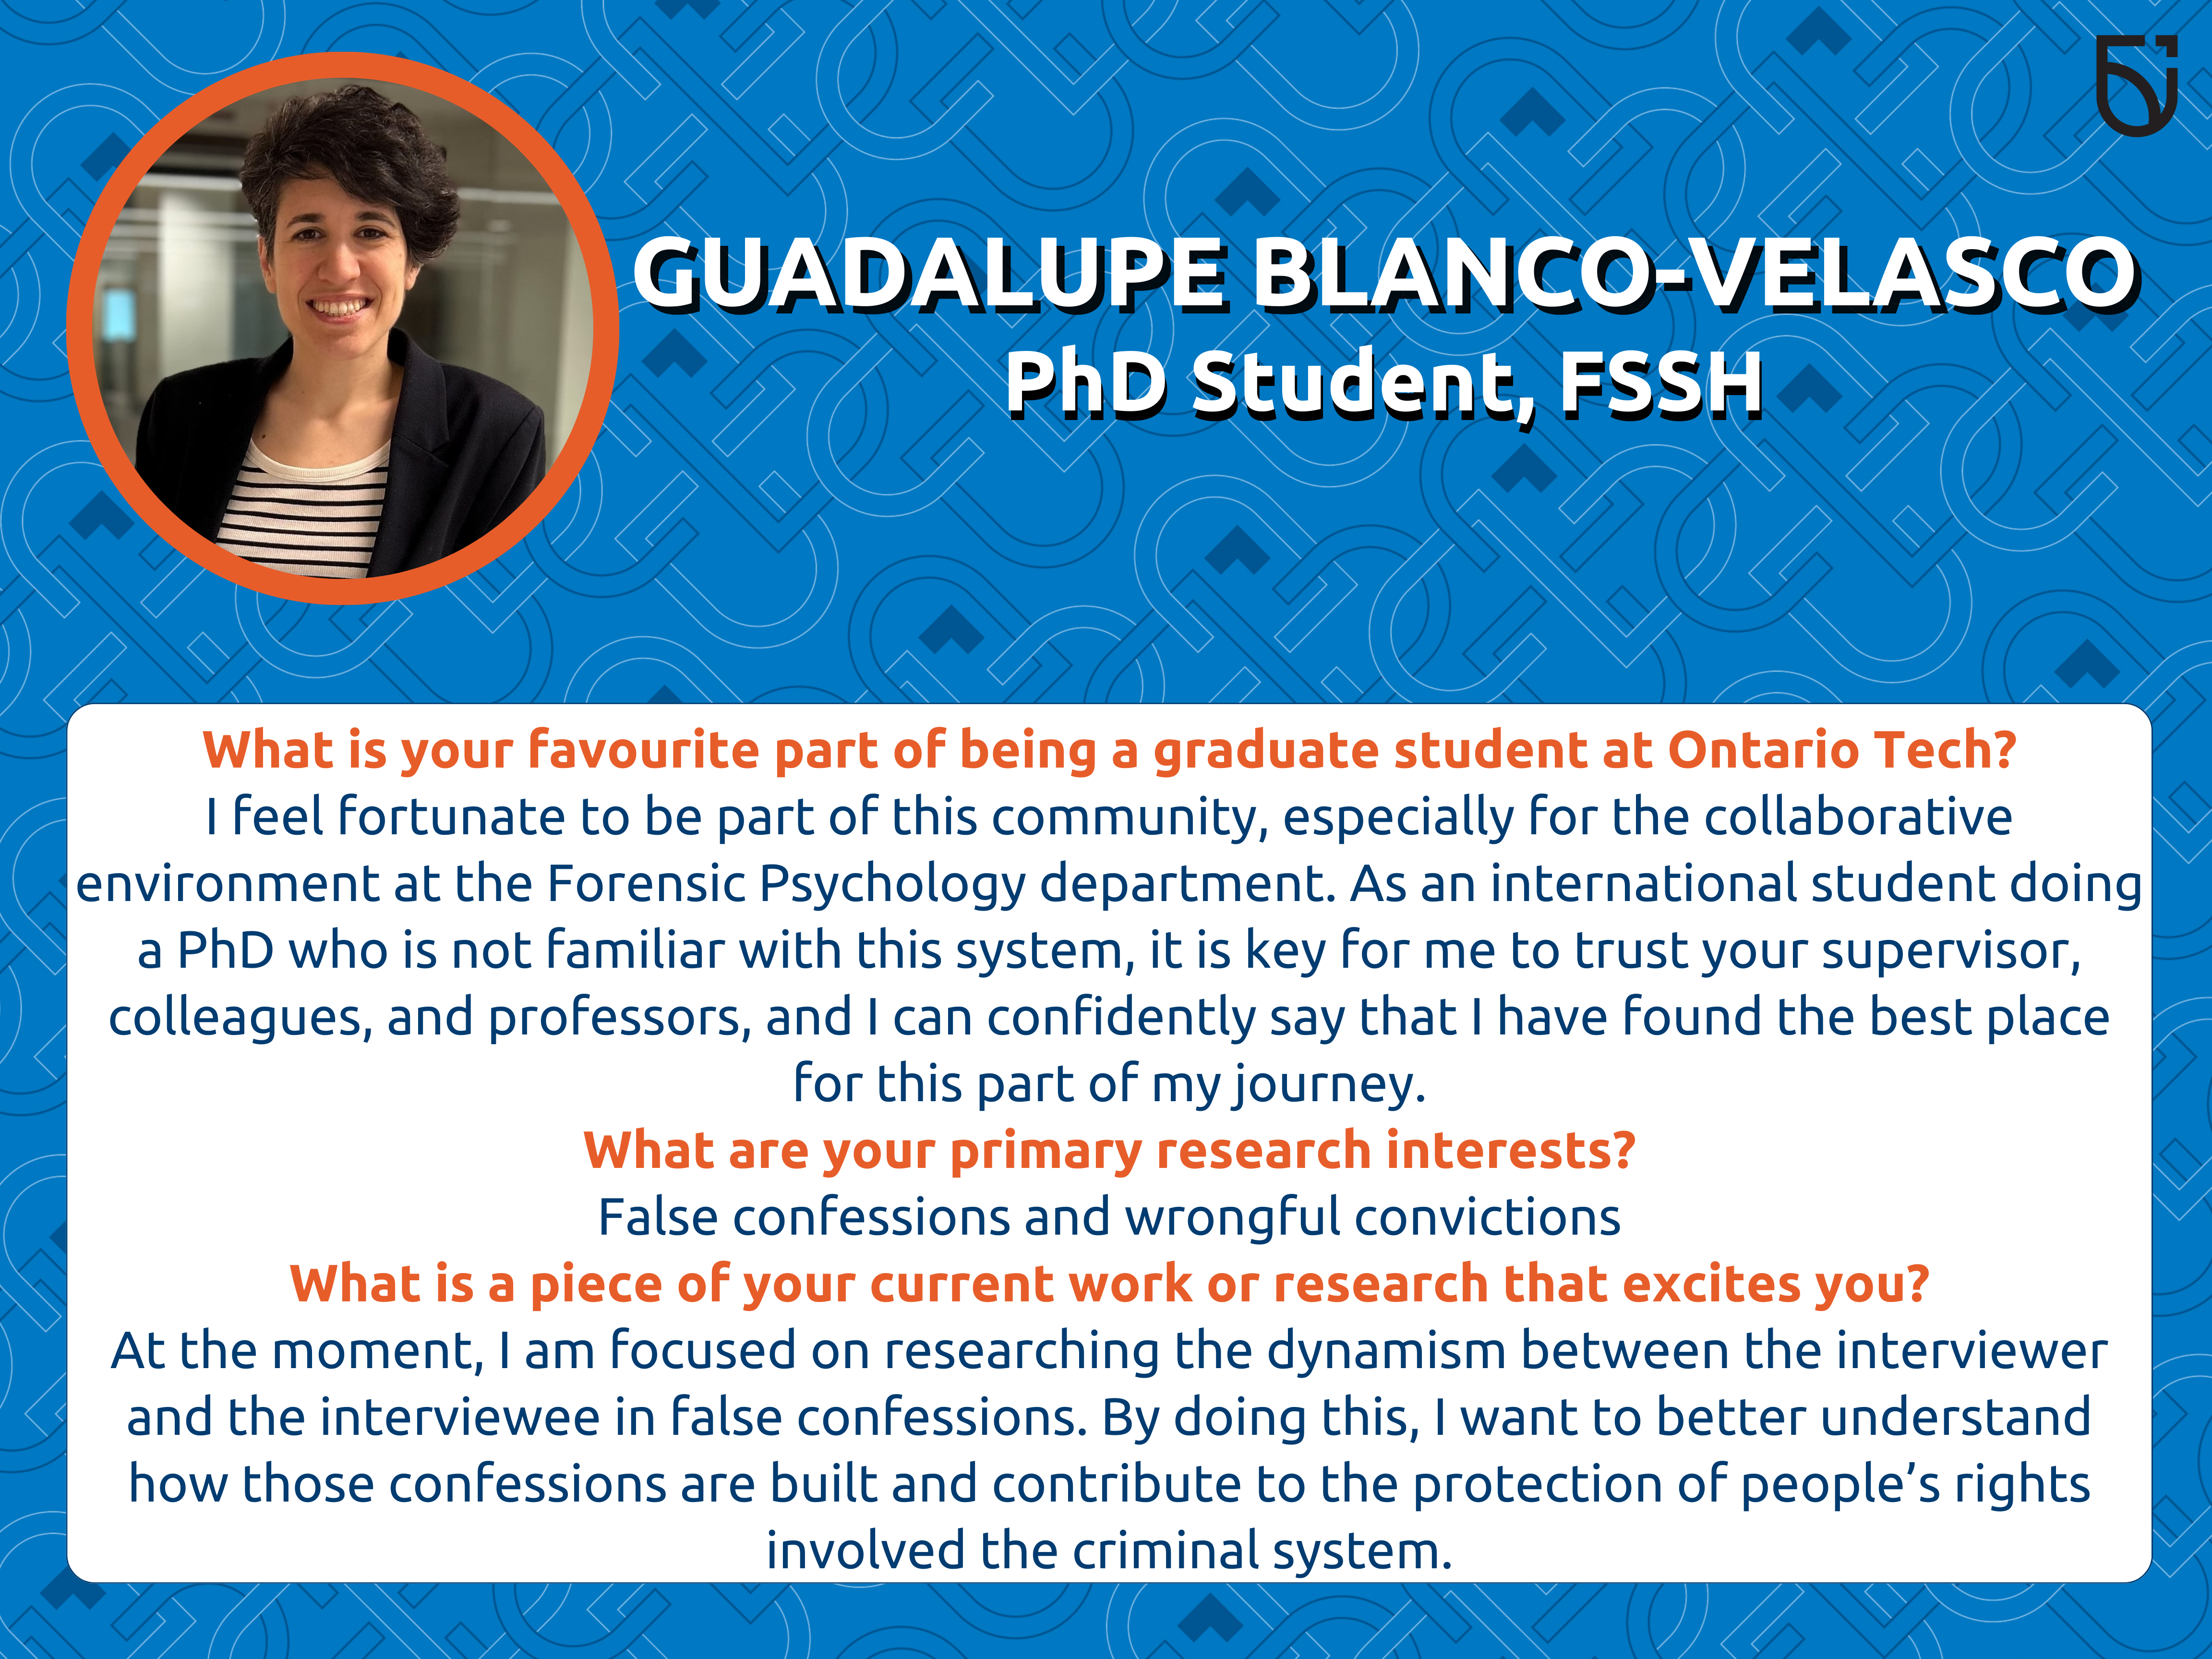 This photo is a Women’s Wednesday feature of Guadalupe Blanco-Velasco, a PhD student in the Faculty of Social Science and Humanities.